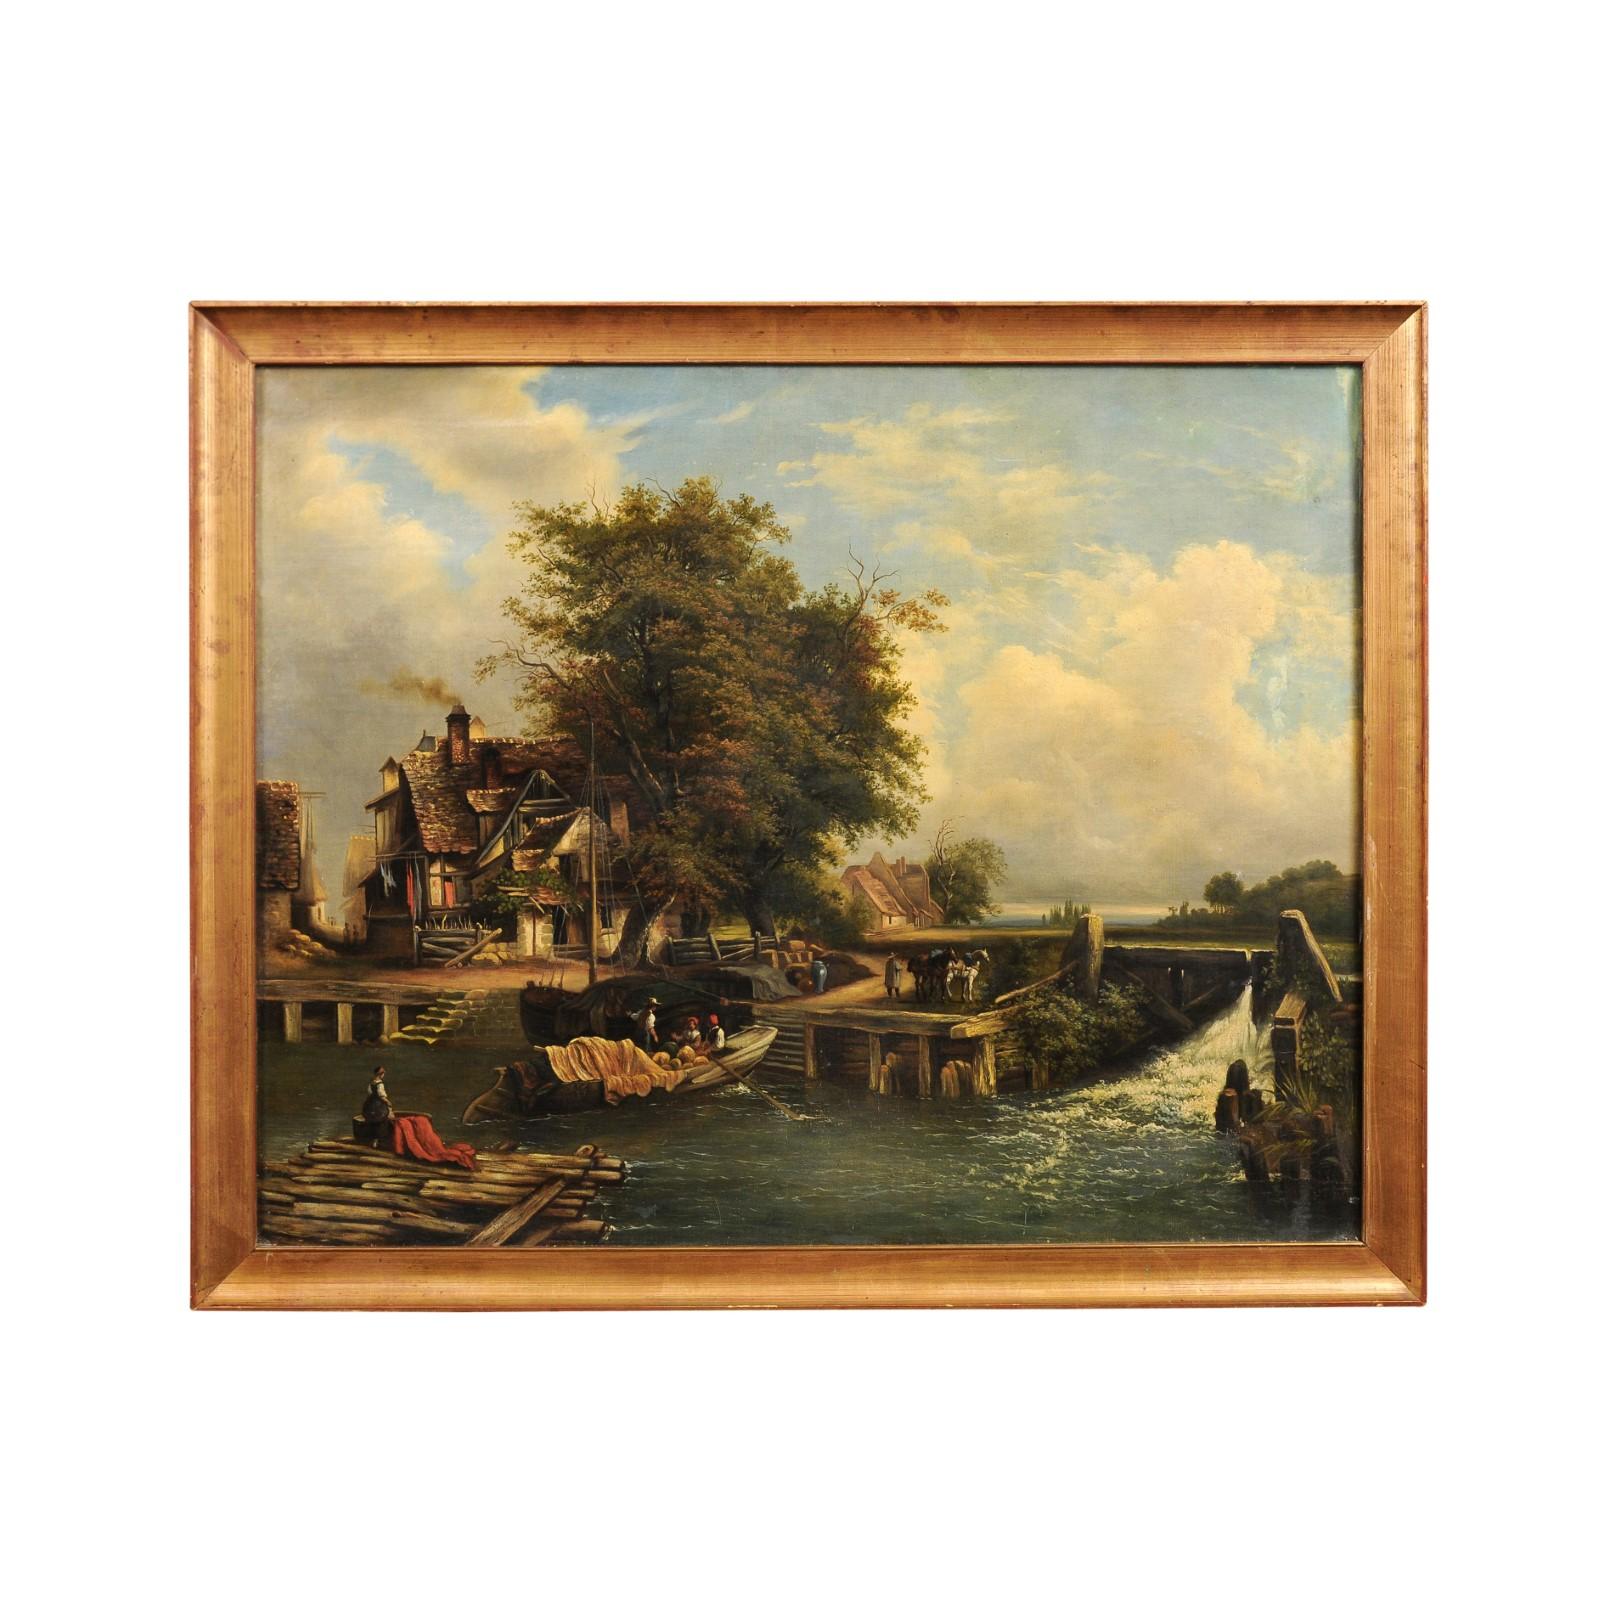 A French oil on canvas landscape painting from the 19th century, depicting a scene of everyday life in a village. Created in France during the 19th century, this horizontal format oil on canvas painting depicts a humble, everyday life scene. Bathed